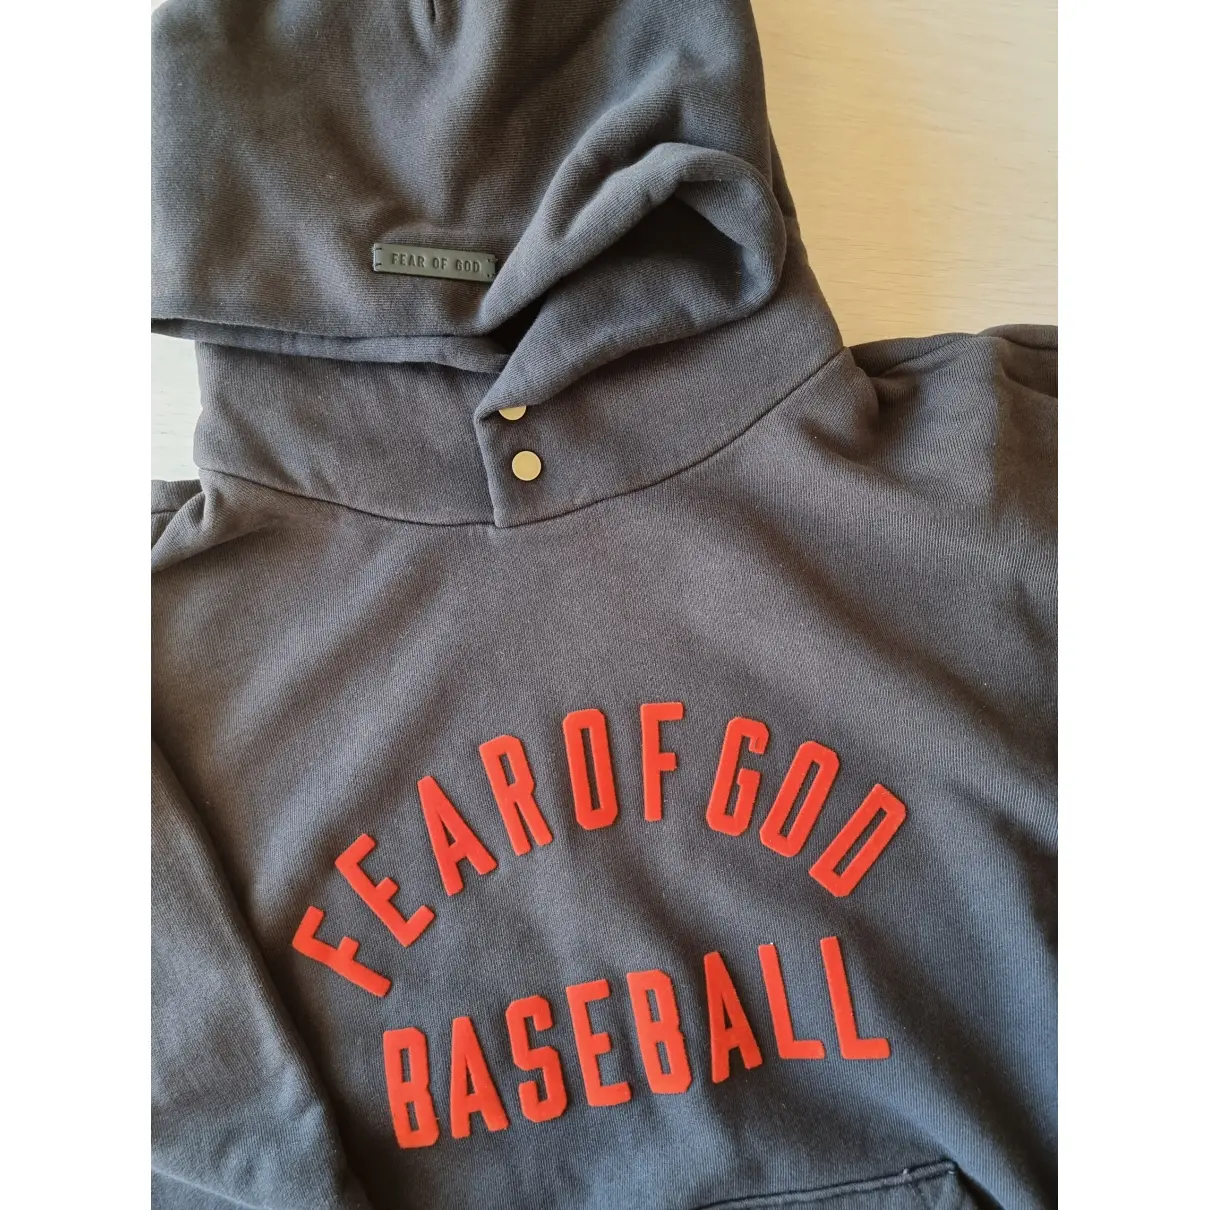 SeventhCollection sweatshirt Fear of God